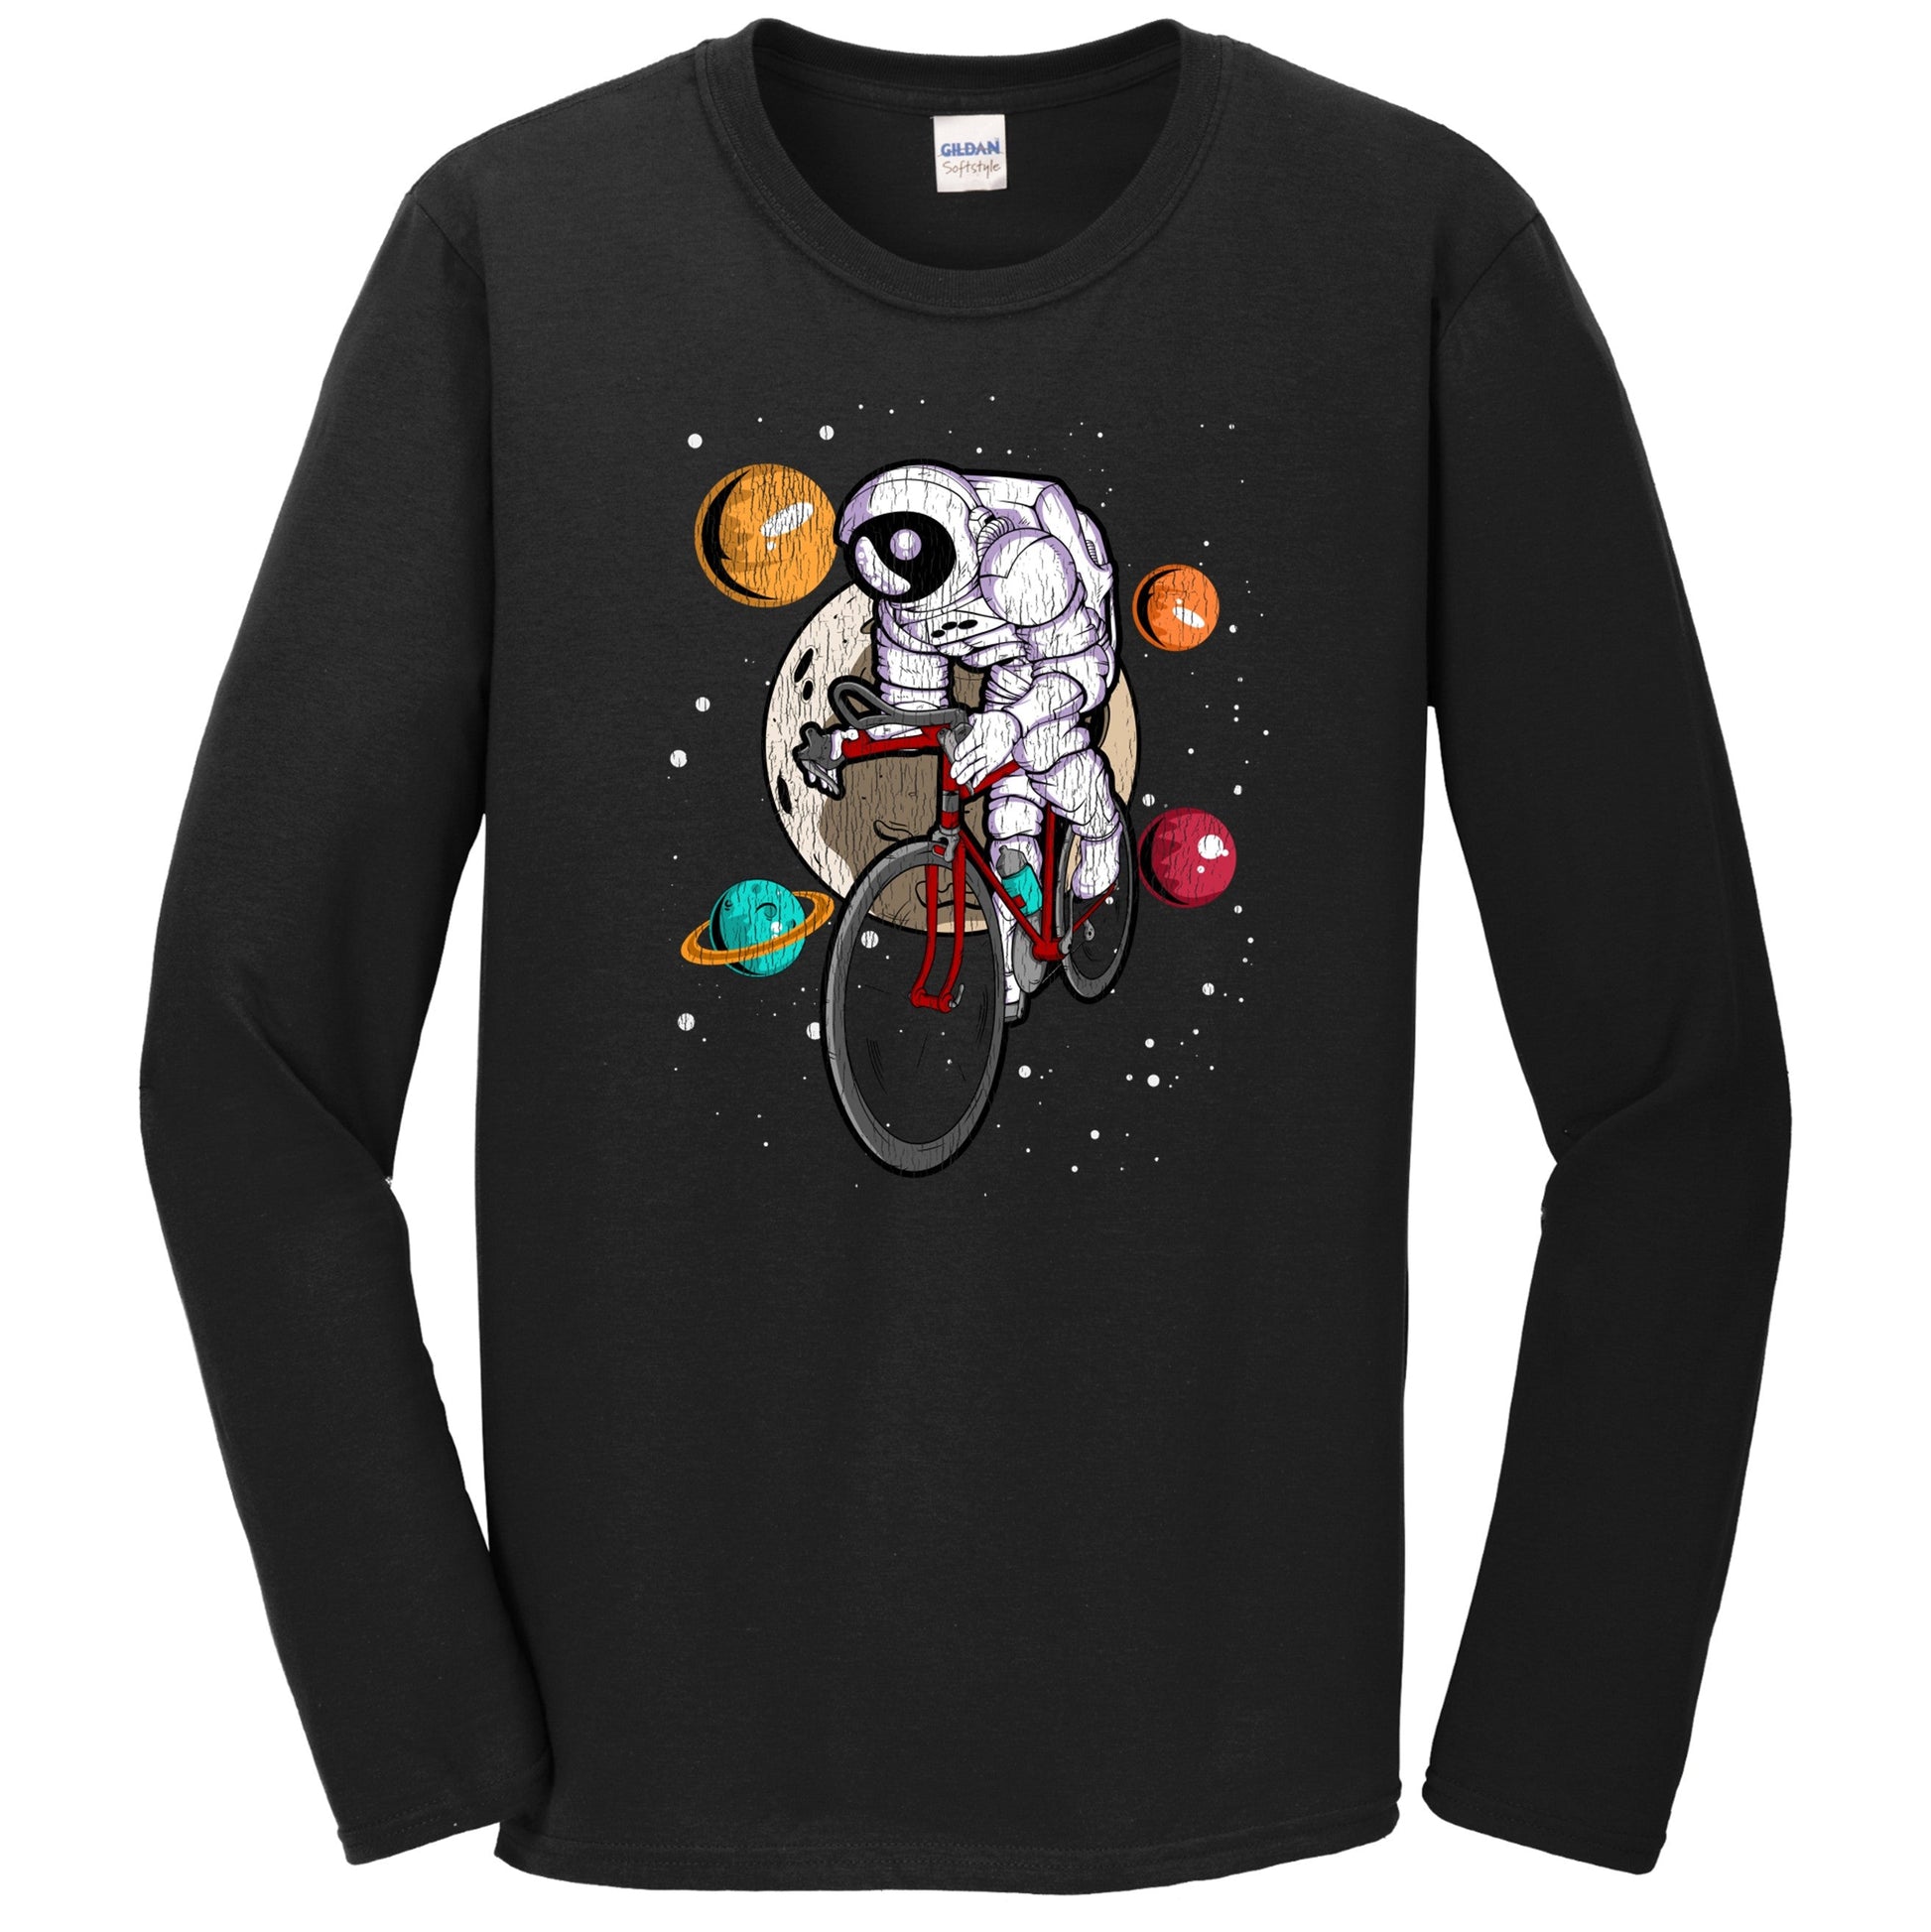 Cycling Astronaut Outer Space Spaceman Bike Distressed Long Sleeve T-Shirt